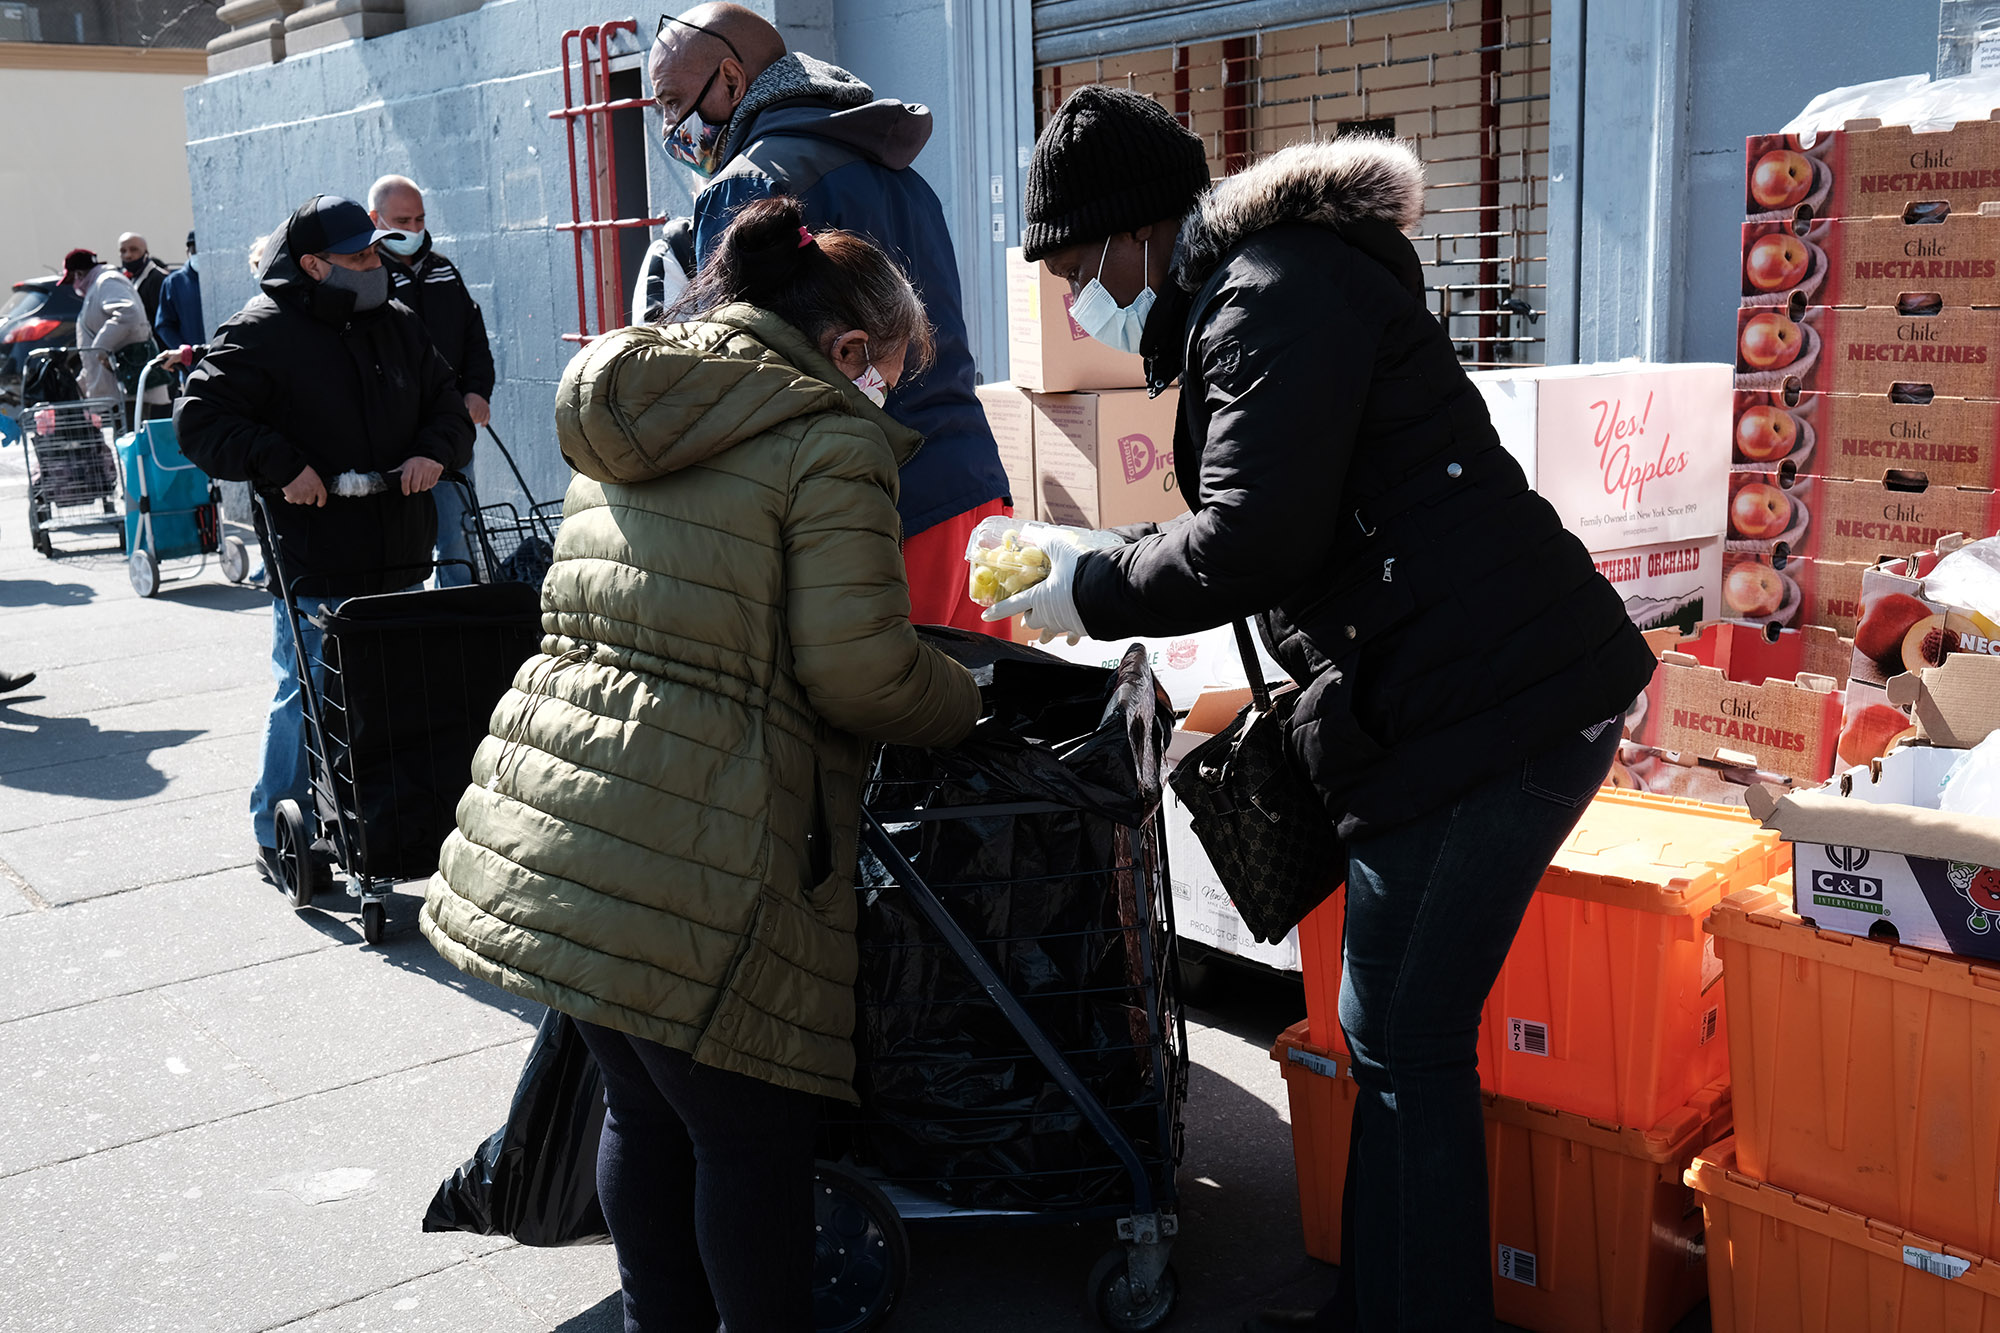 As Covid Outlook Improves, South Bronx Continues To Struggle With High Unemployment And Poverty